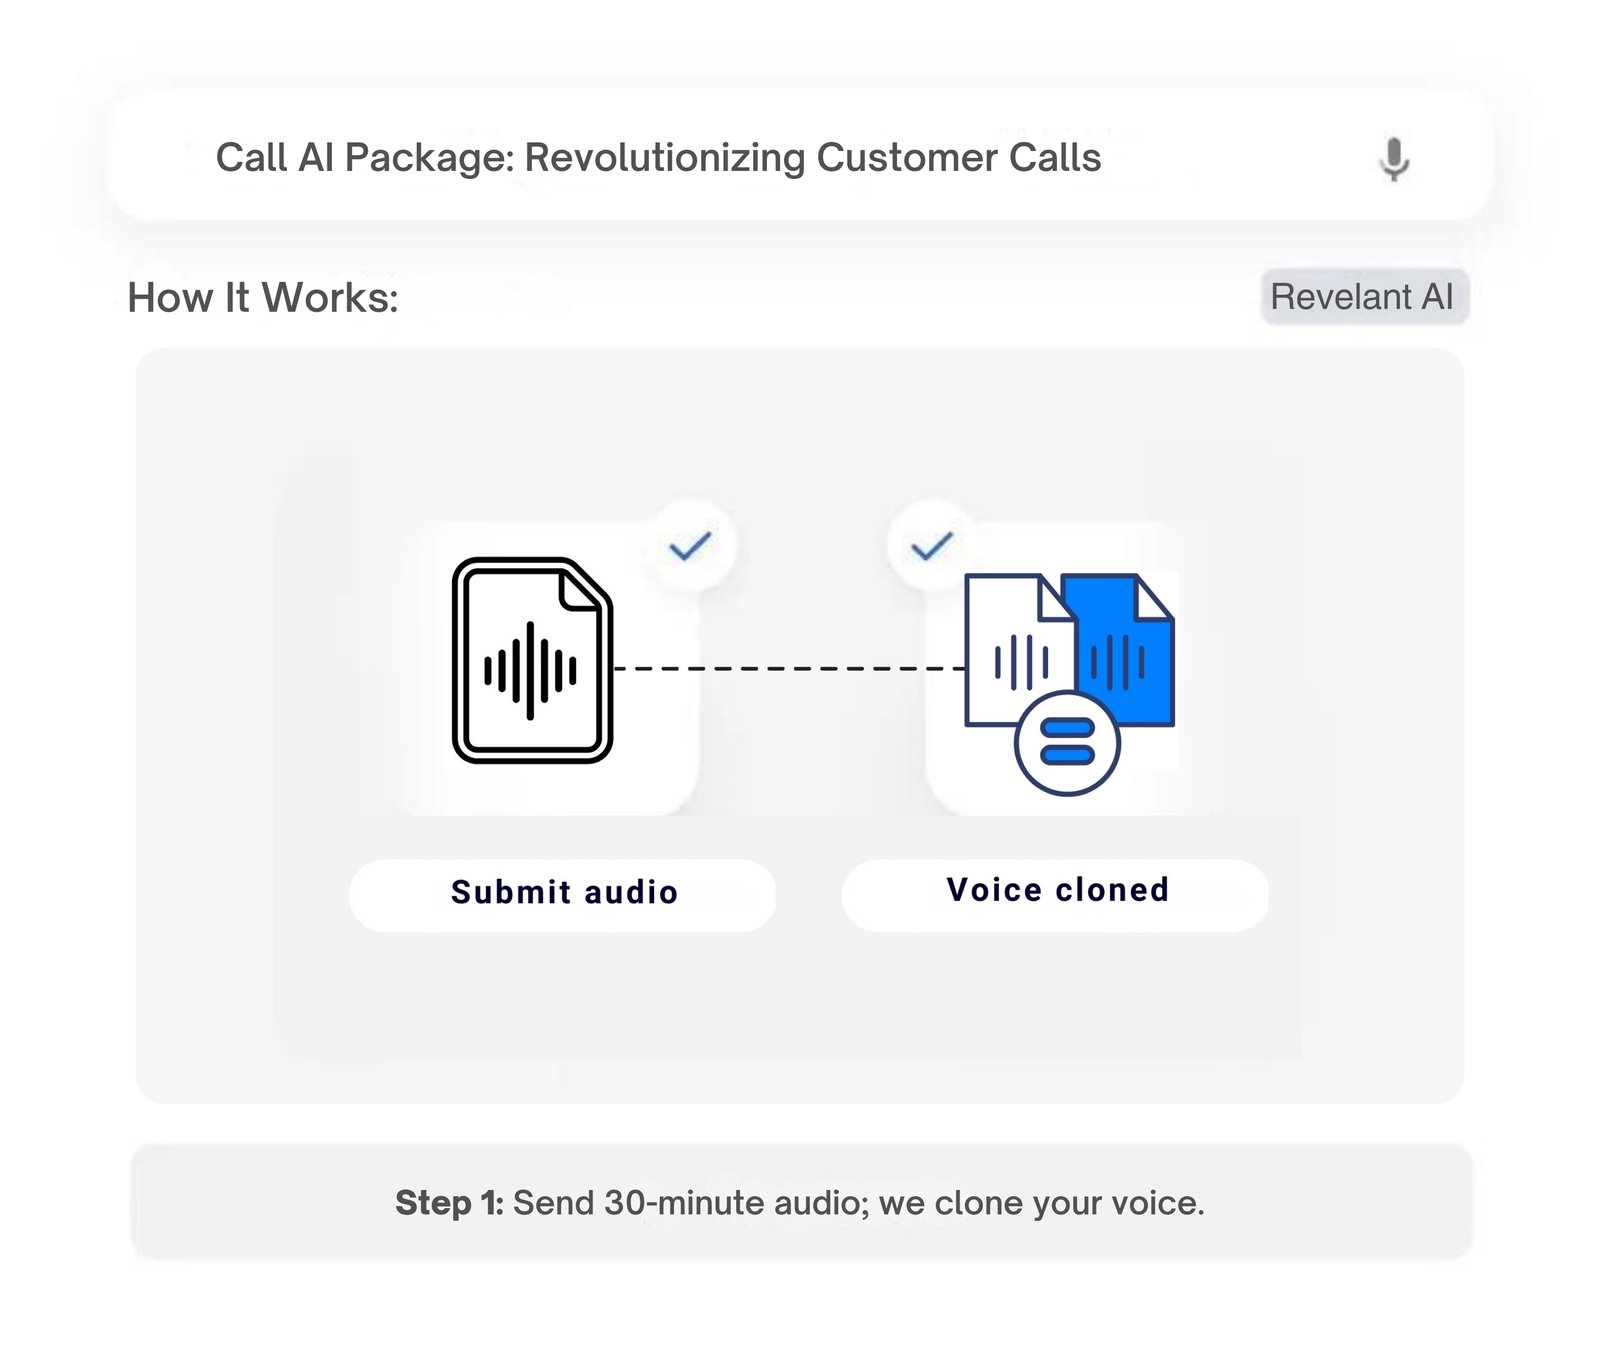 AI technology process for cloning a voice from submitted audio as part of customer call management.